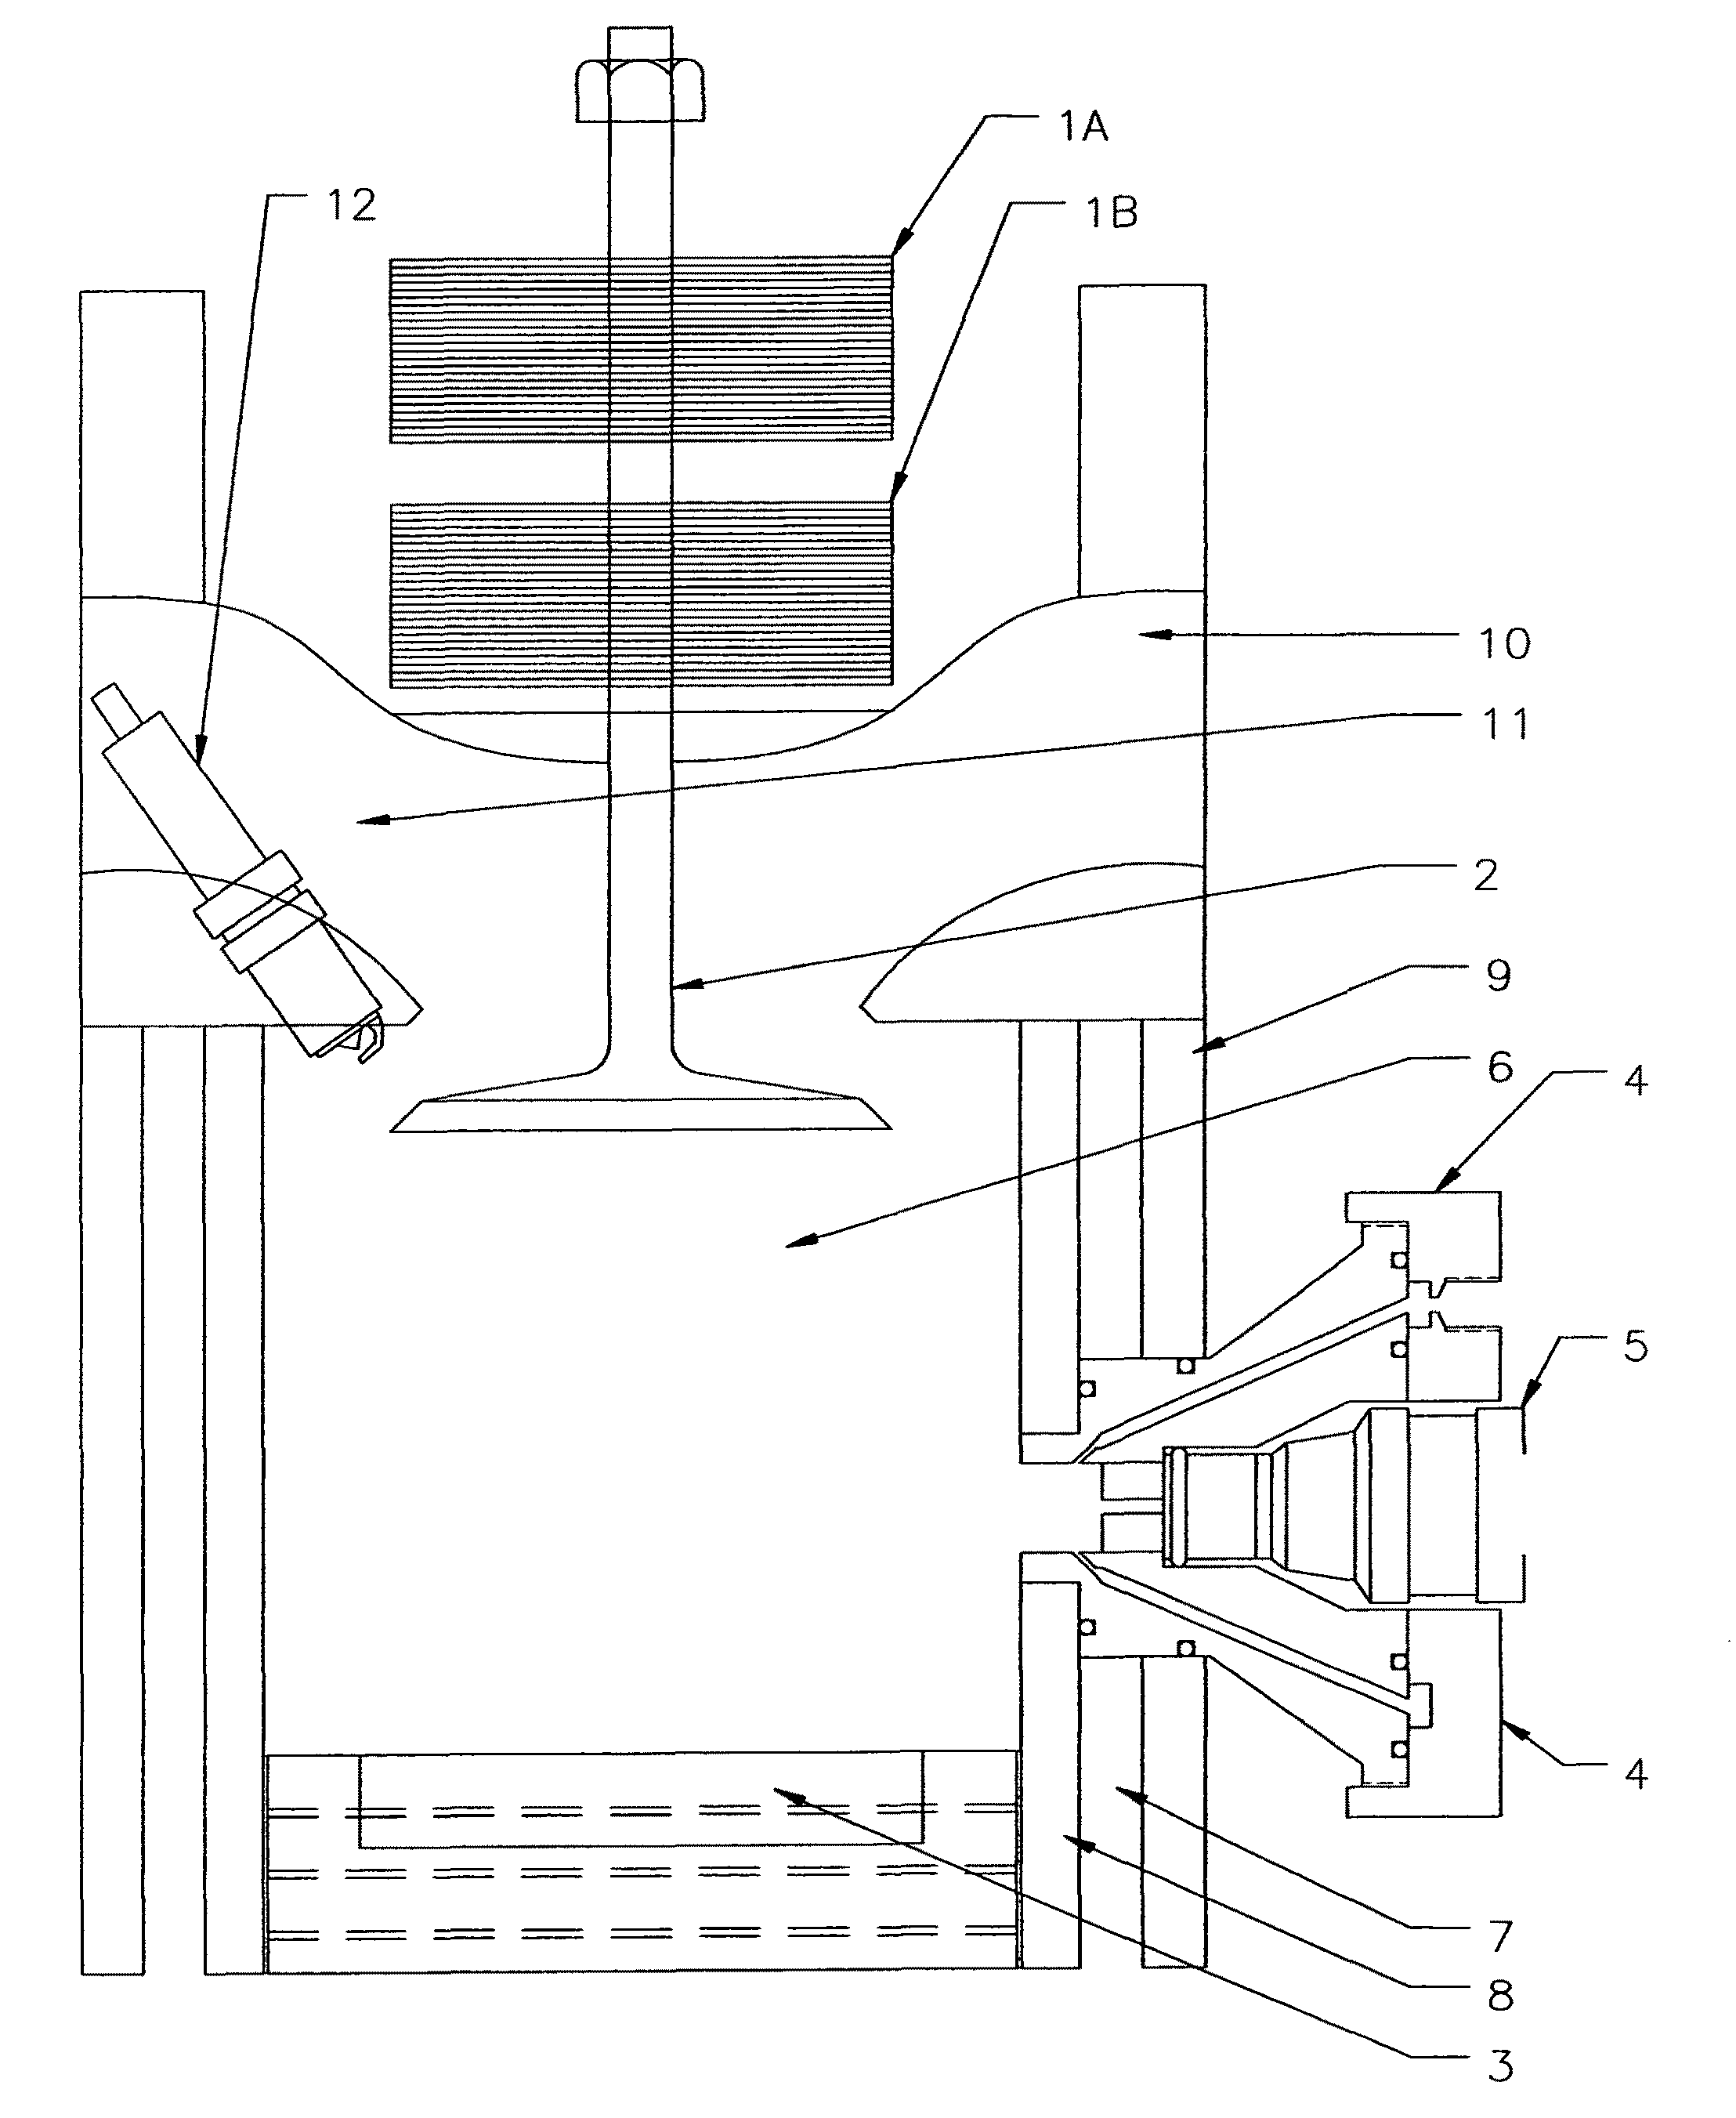 Internal combustion engine having an electric solenoid poppet valve and air/fuel injector